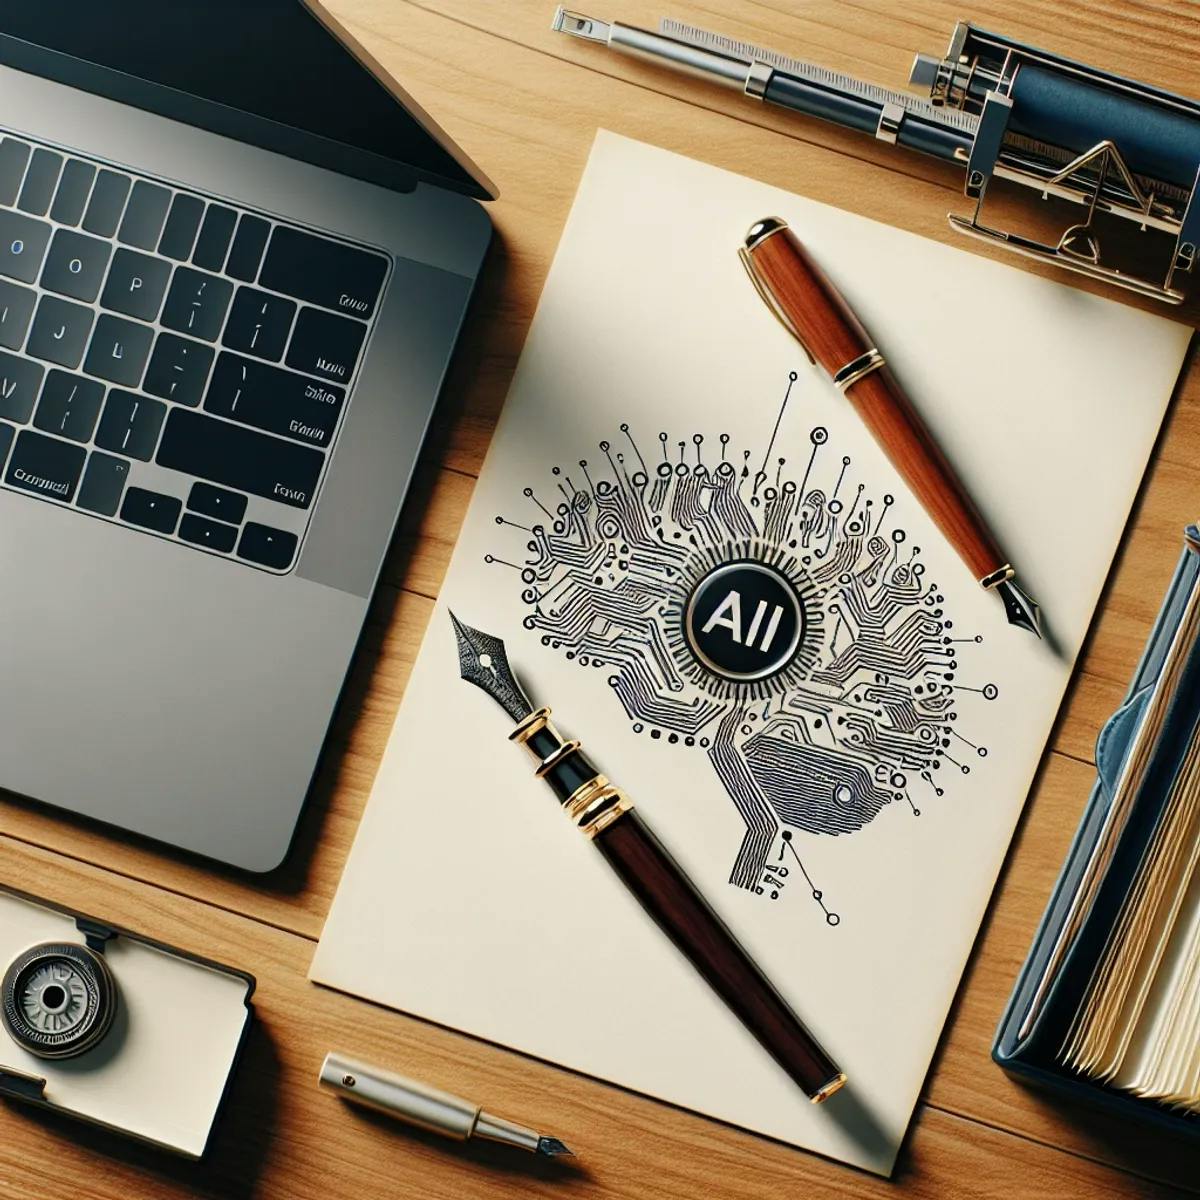 A sleek laptop with an abstract brain circuit pattern on the screen next to a classic fountain pen on a blank sheet of paper on an oak desk.